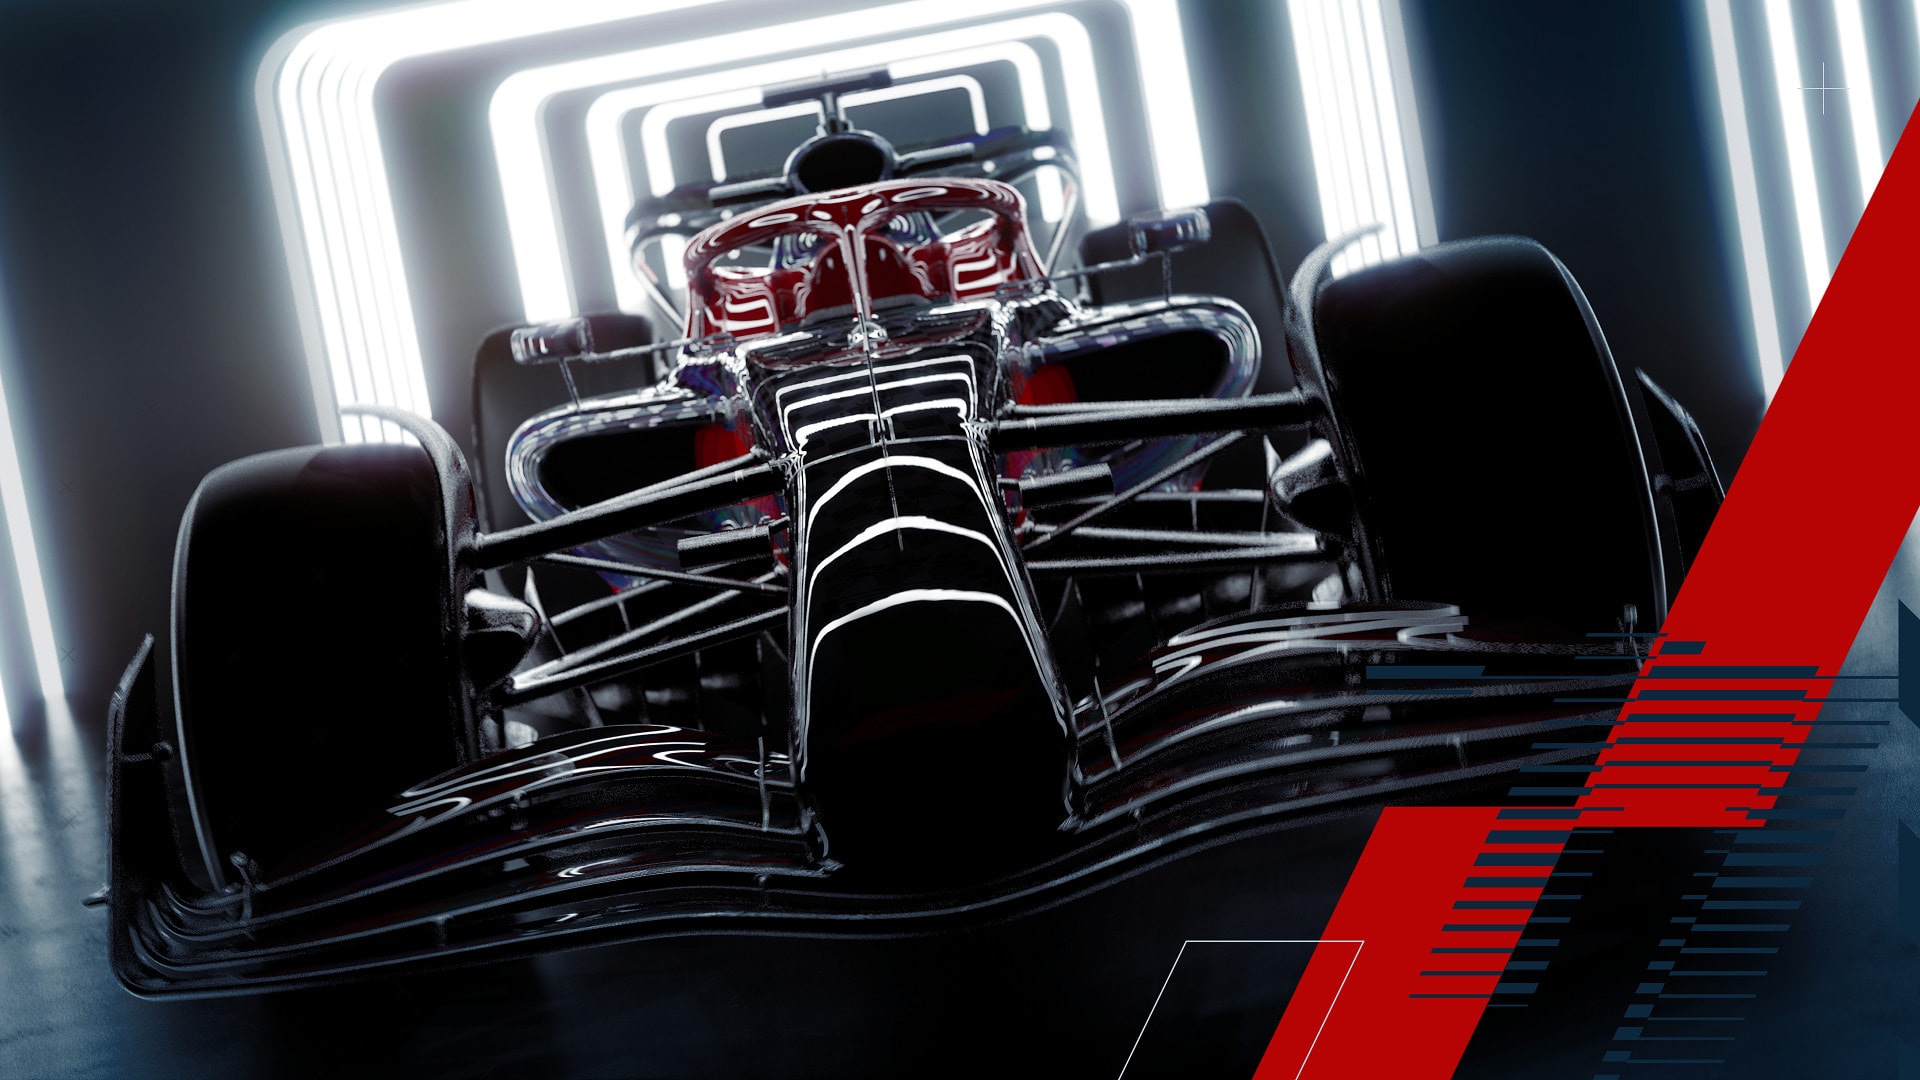 F1® 22 - Available Now - Official Game from Codemasters - Electronic Arts